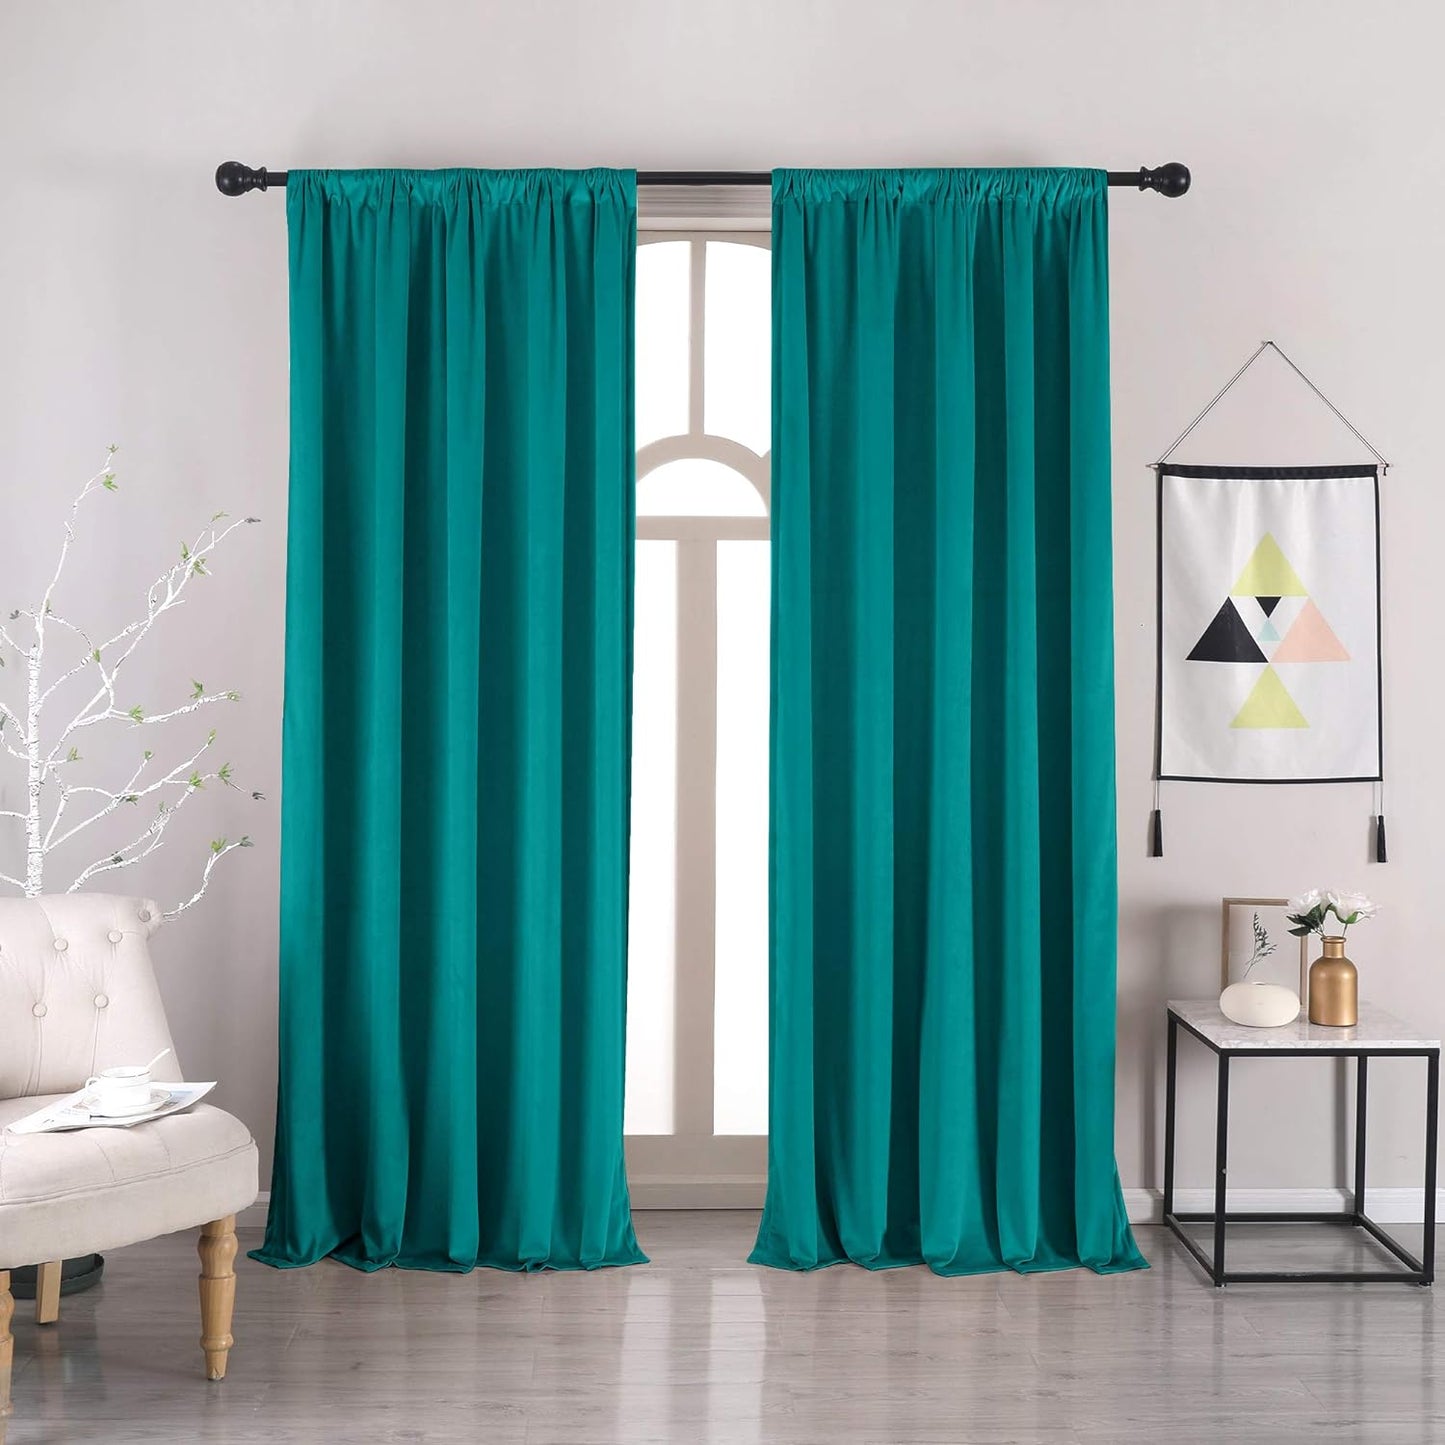 Nanbowang Green Velvet Curtains 63 Inches Long Dark Green Light Blocking Rod Pocket Window Curtain Panels Set of 2 Heat Insulated Curtains Thermal Curtain Panels for Bedroom  nanbowang Turquoise 52"X54" 